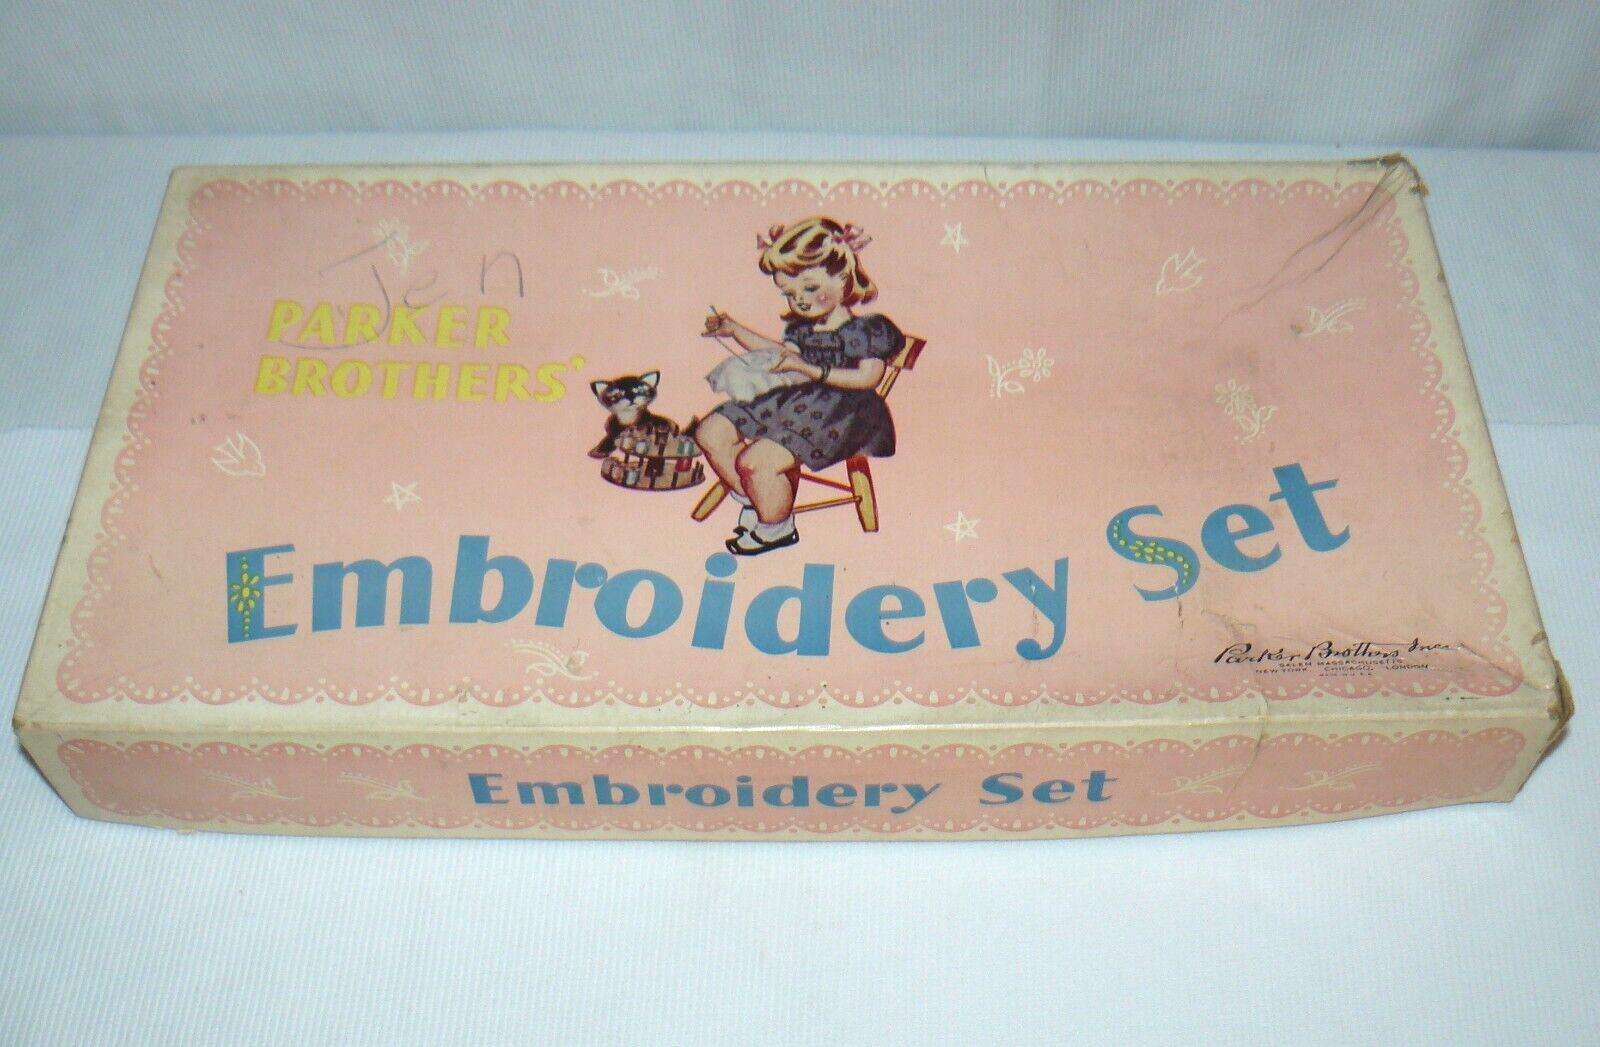 Vintage Parker Brothers Embroidery Set Sewing 15x8